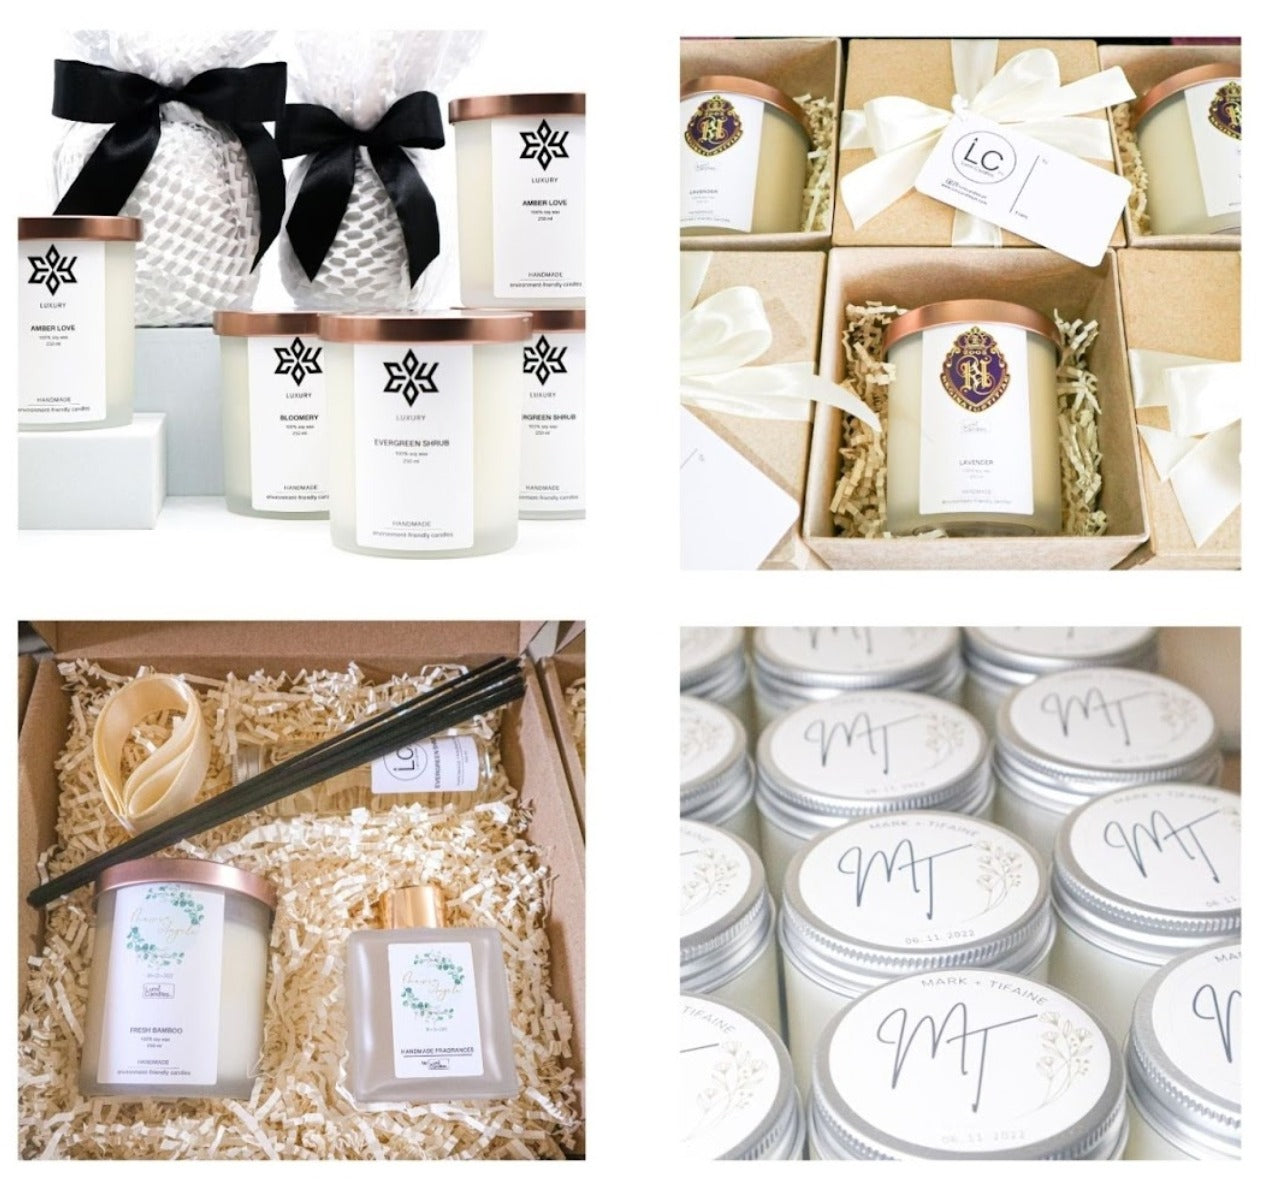 Lumi Candles PH custom packaging for different occasions